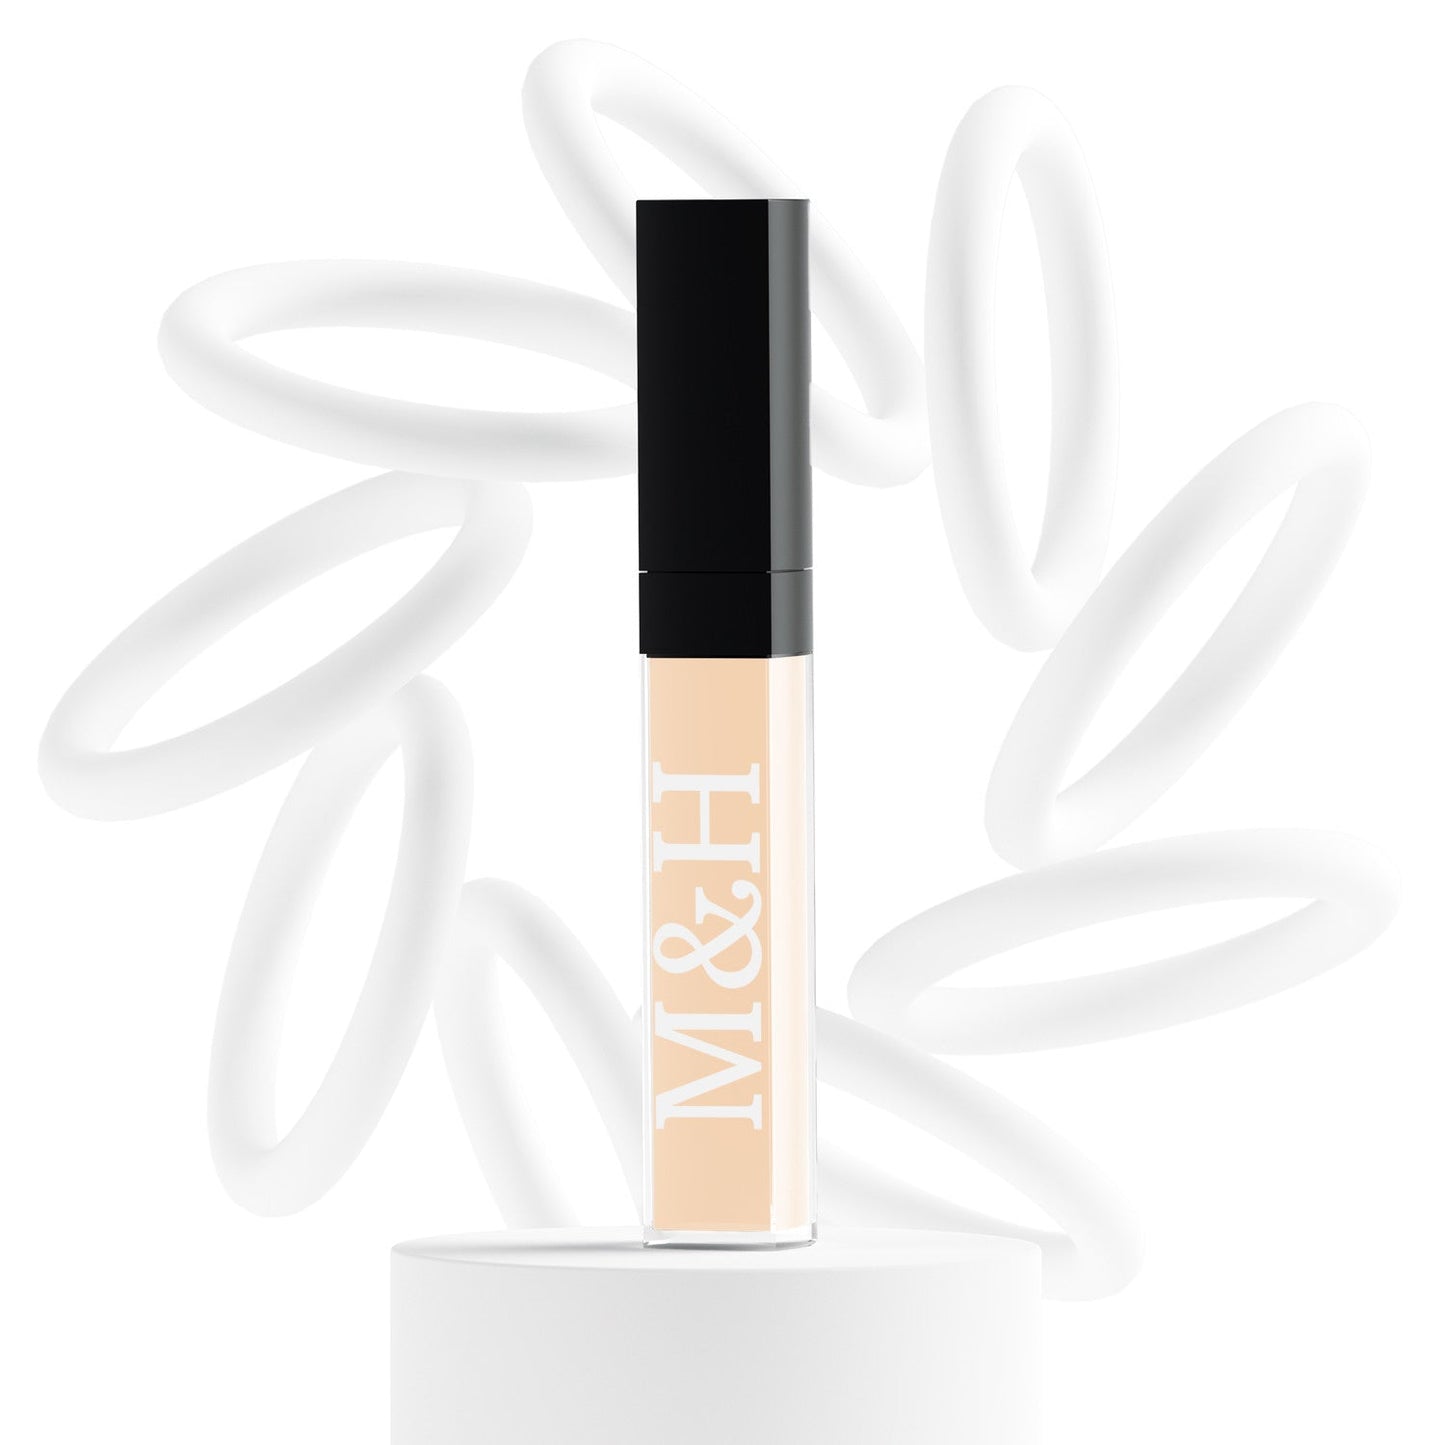 Vegan Concealers - M&H FashionVegan ConcealersconcealerM&H FashionM&H FashionConcealer-901Light PorcelainVegan ConcealersM&H FashionconcealerM&H Fashion This multifunctional concealer is designed to cover under-eye circles, complexion alterations, and major imperfections like scars, hyperpigmentation, burns, and tatVegan Concealers